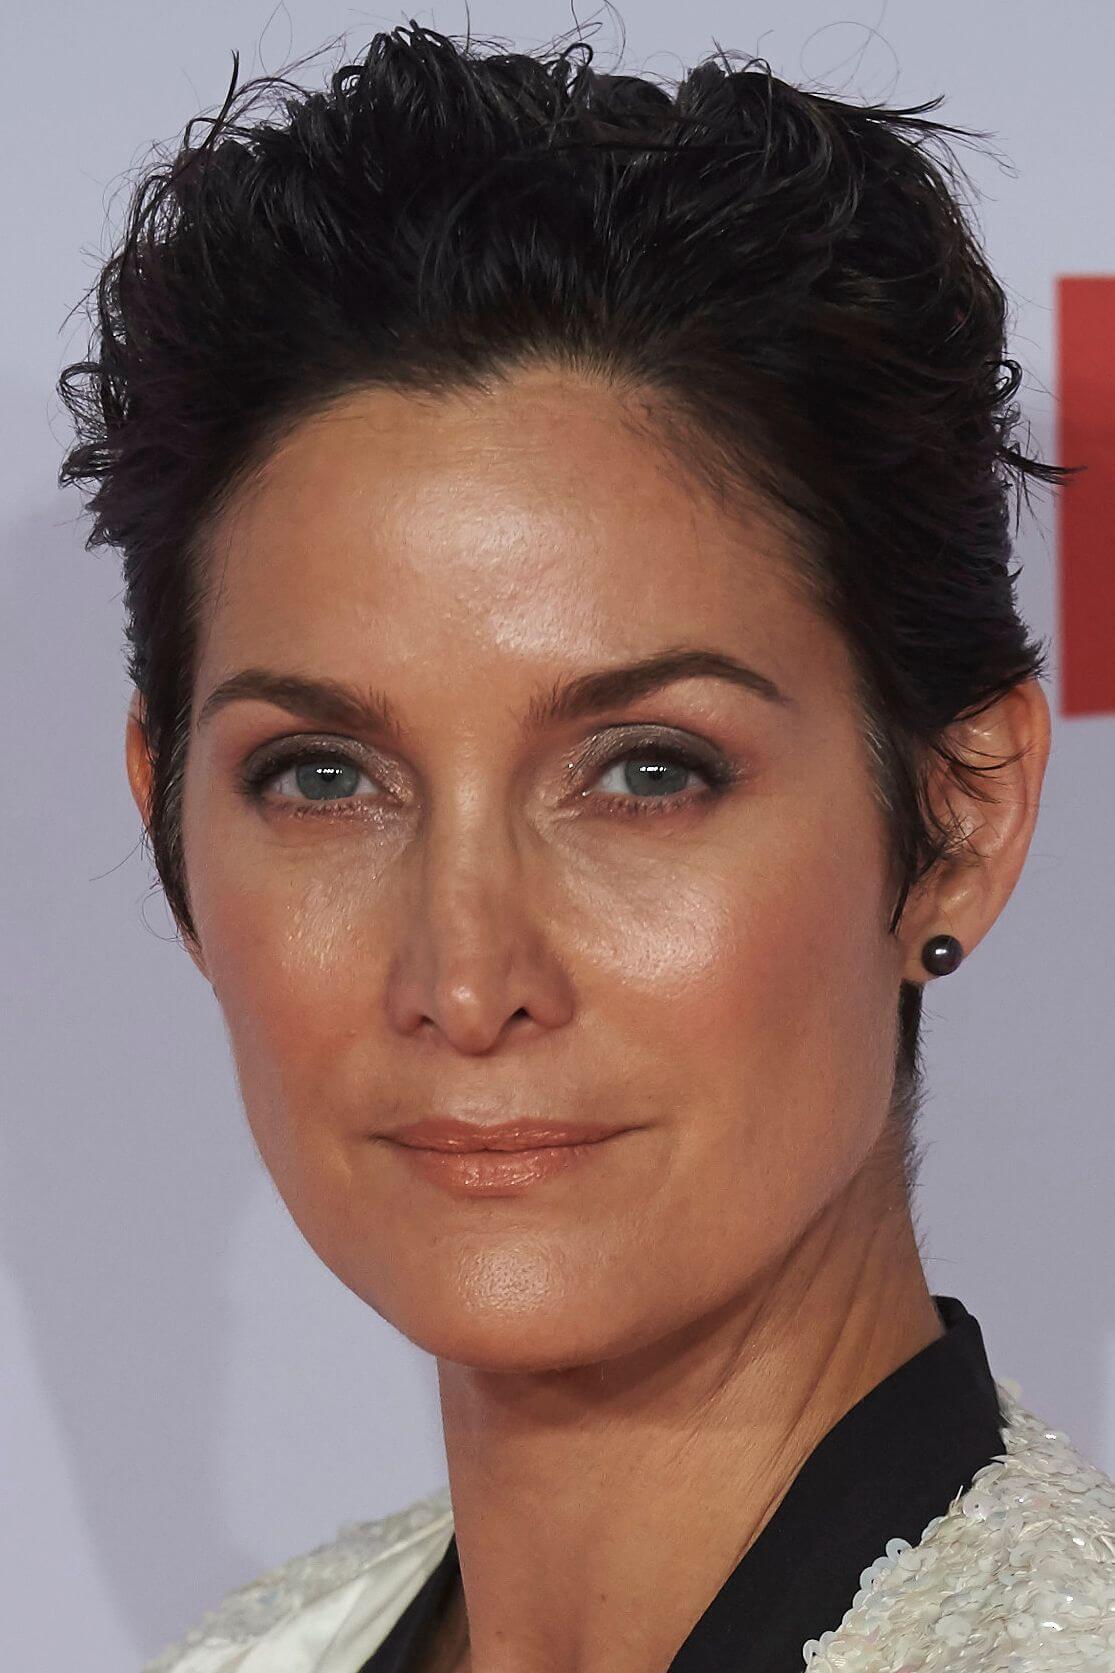 60+ Hottest Carrie-Anne Moss Boobs Pictures Will Make You Fall In Love Like Crazy 175